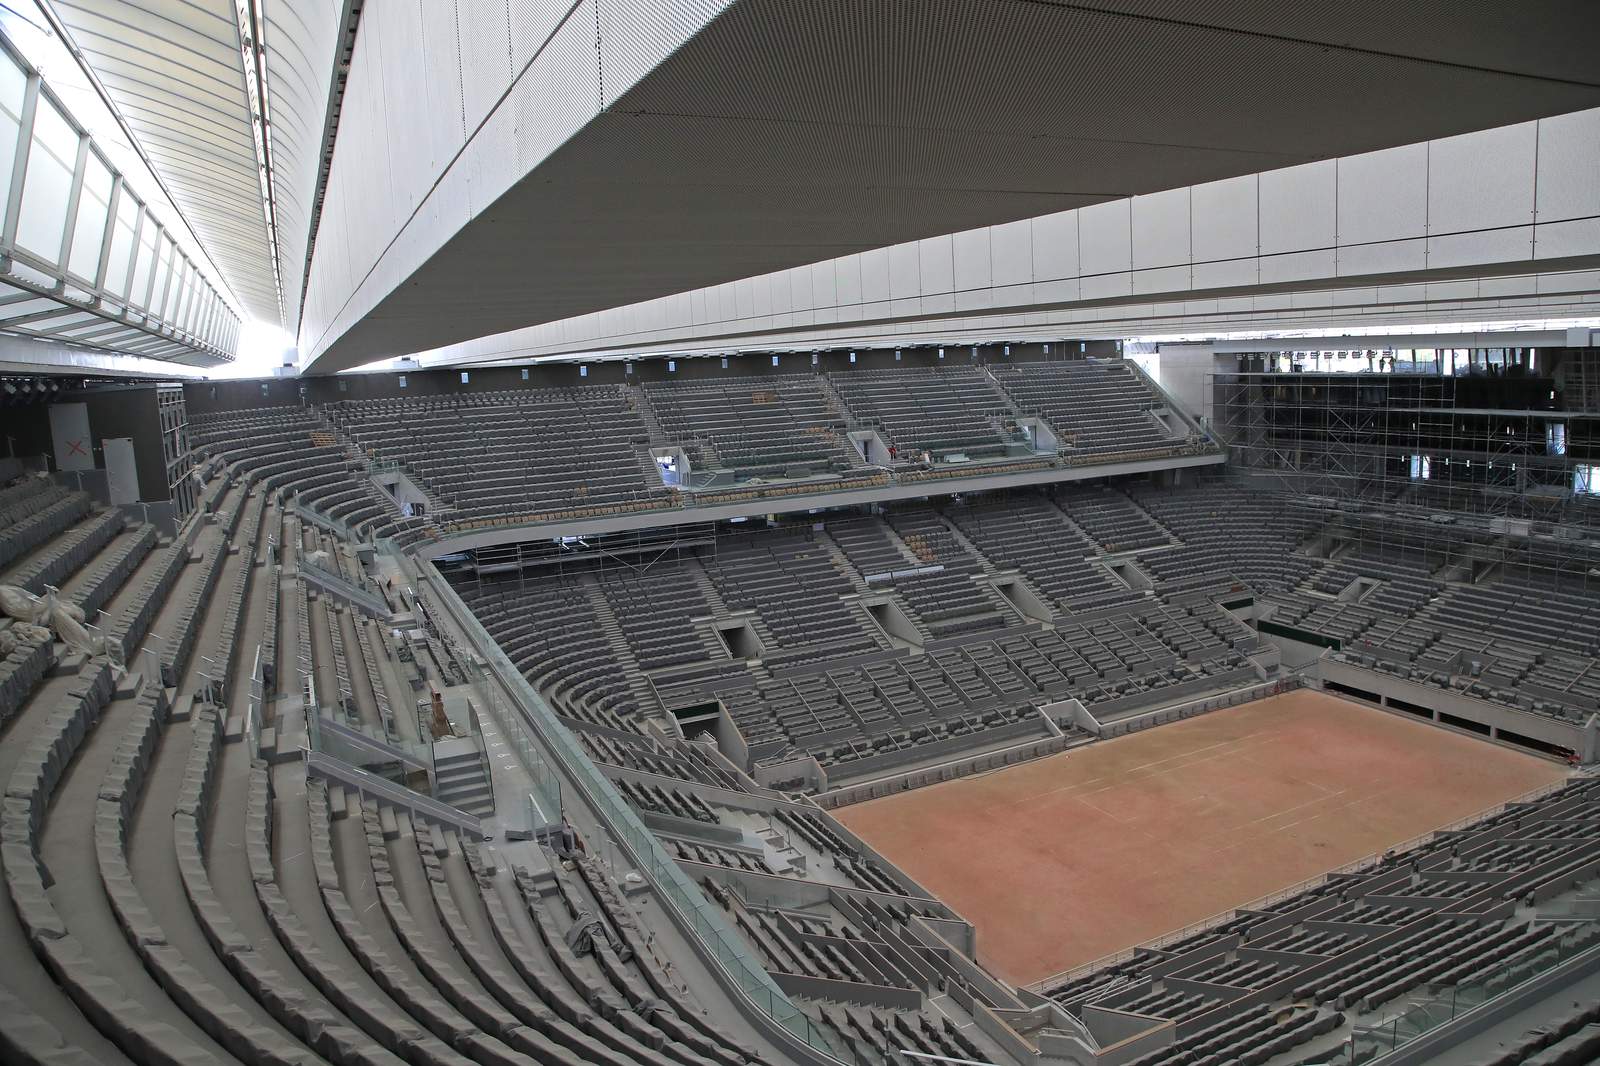 Could be limited - or no - fans at a September French Open